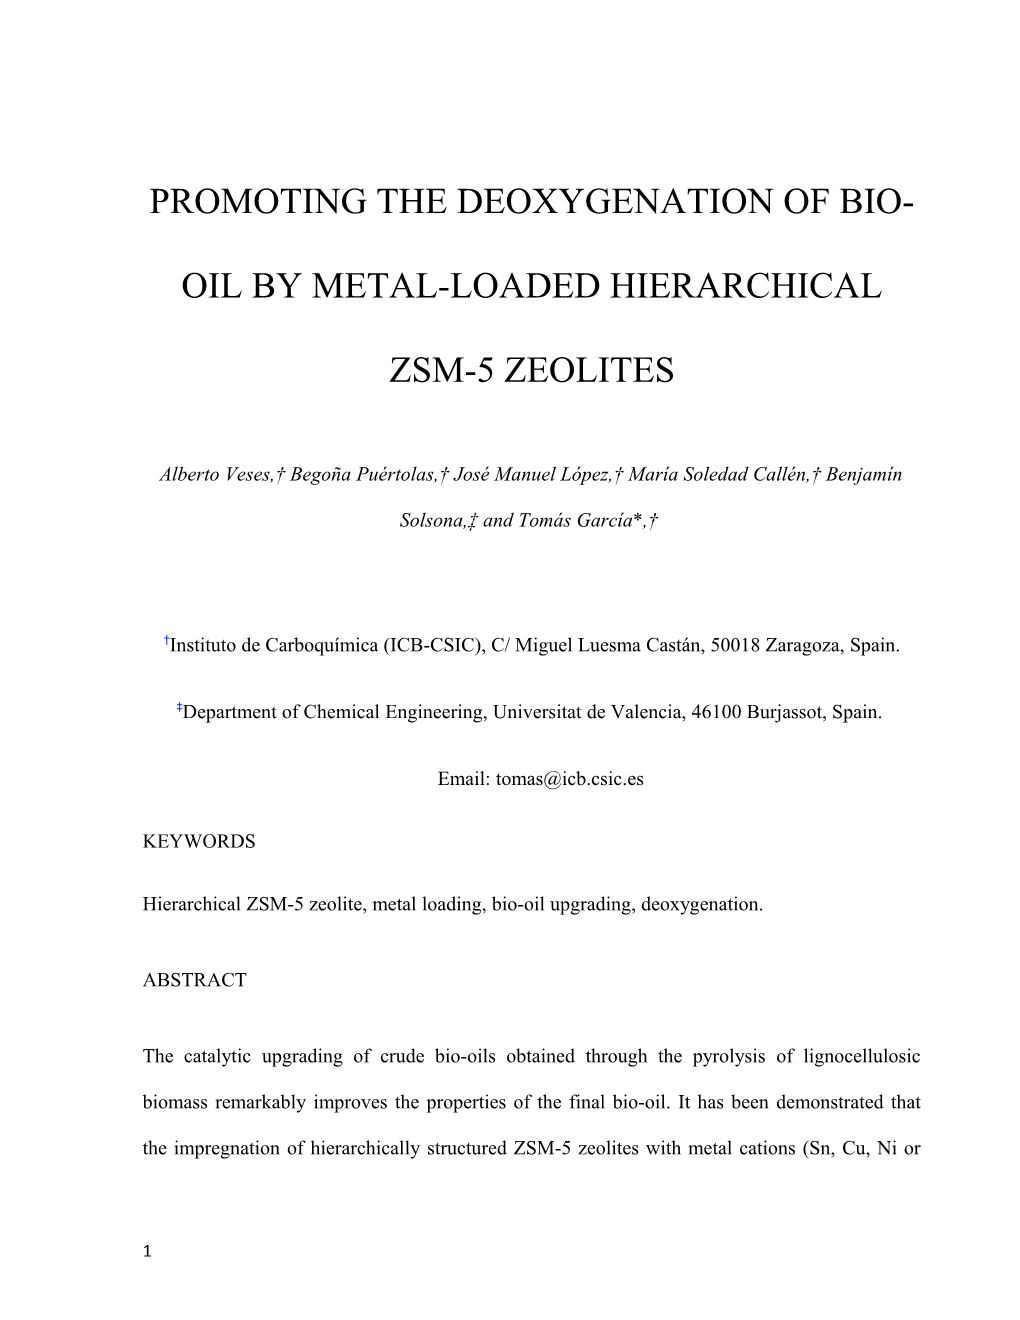 Promoting the Deoxygenation of Bio-Oil by Metal-Loaded Hierarchical Zsm-5 Zeolites